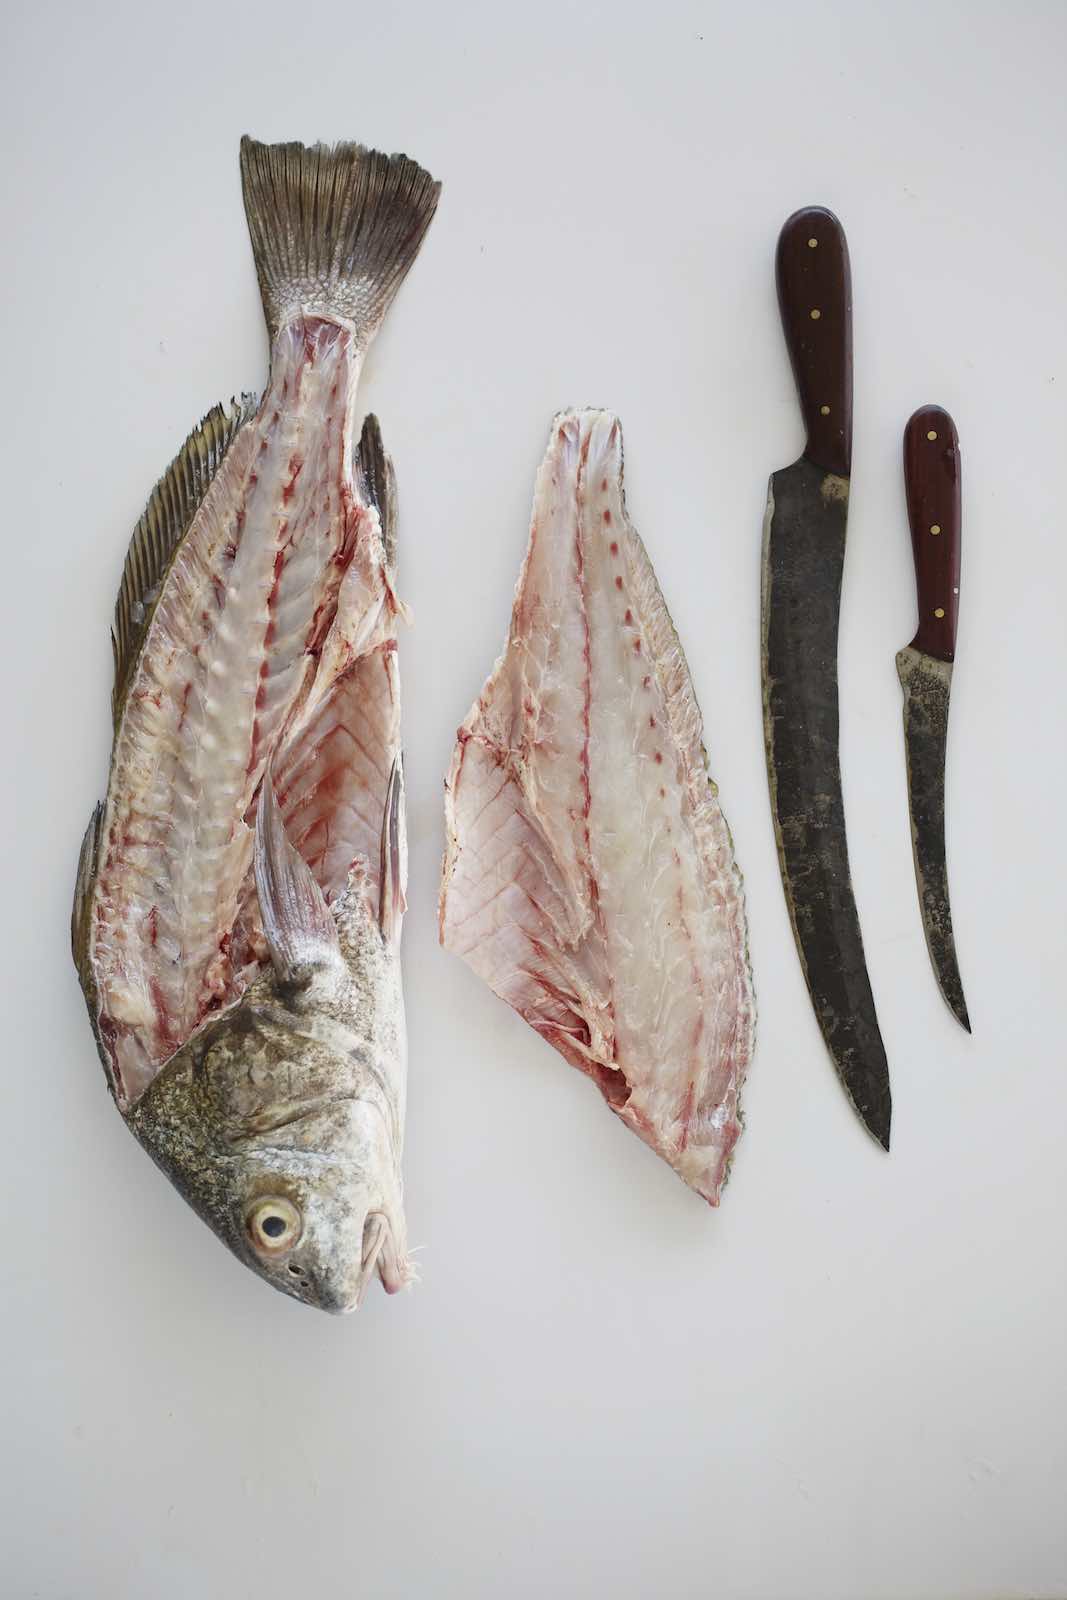 Jody Horton Photography - Filleted fish and rustic knives. 